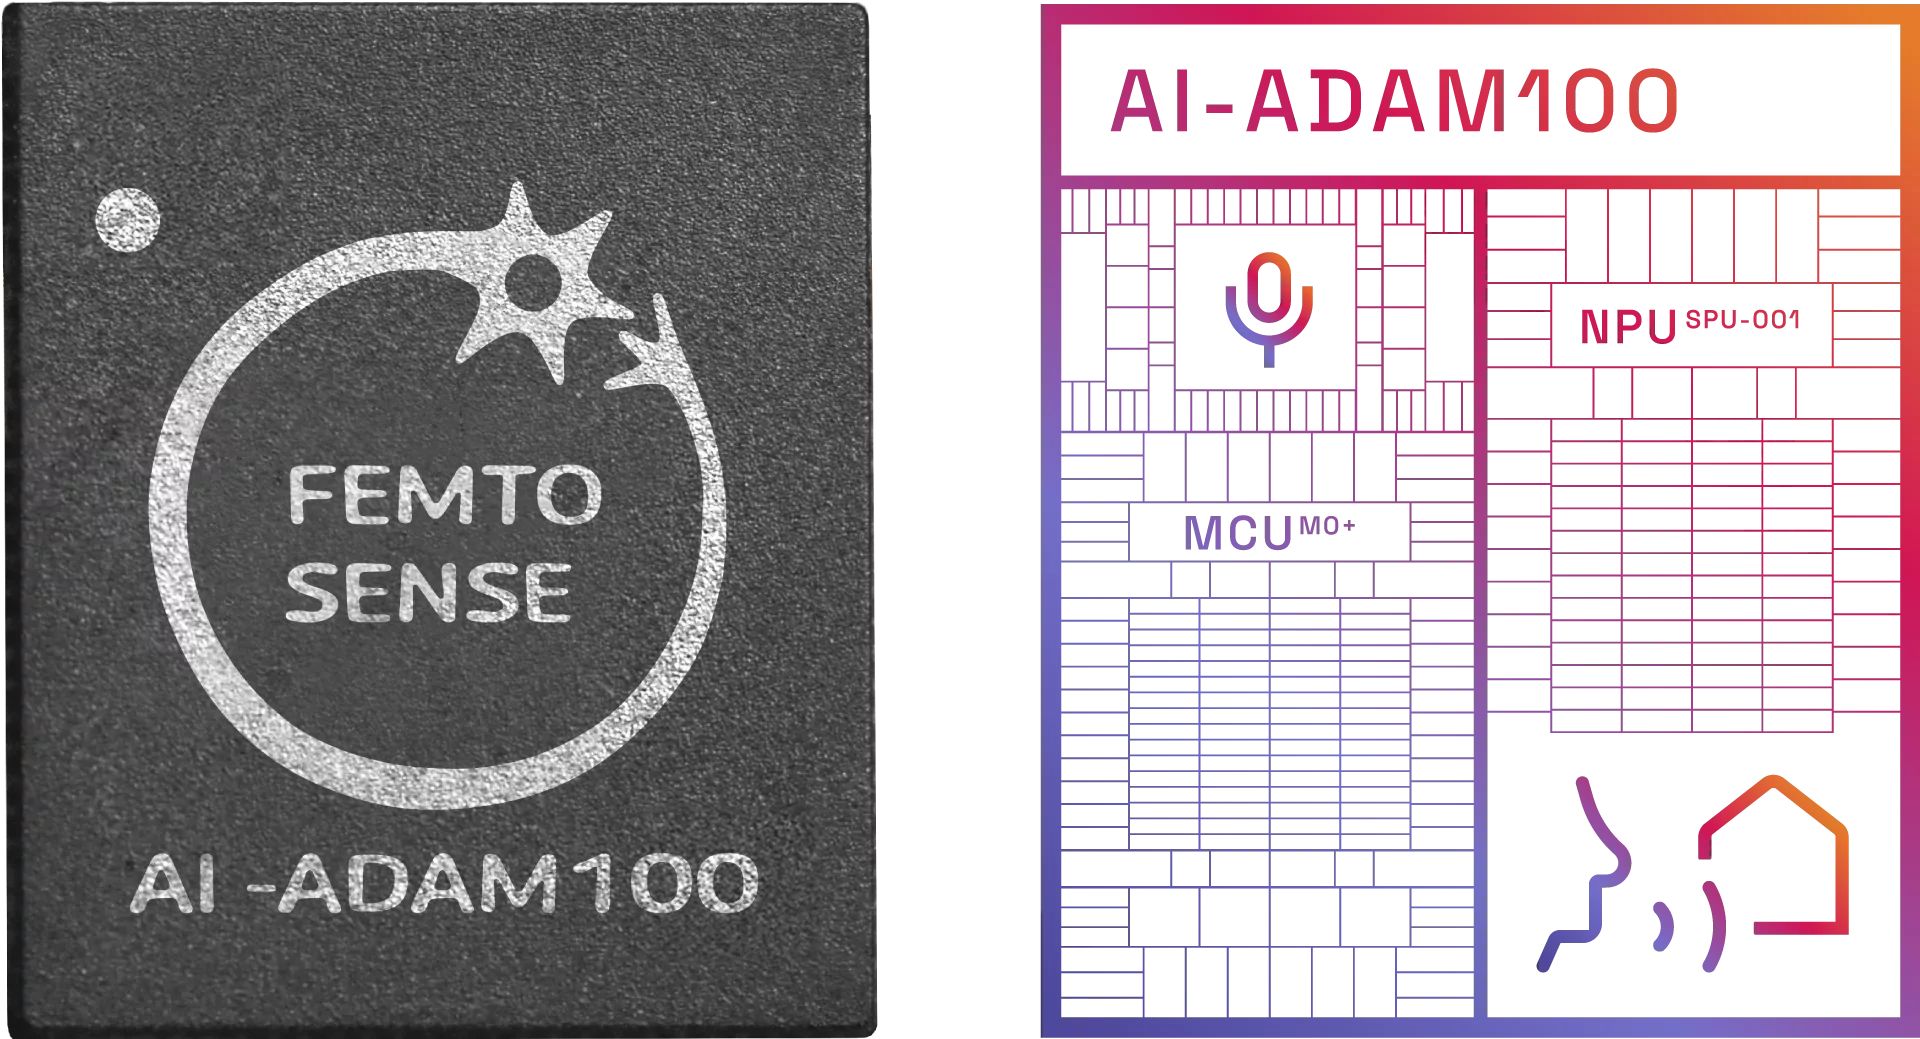 Femtosense introduces the AI-ADAM-100 system-in-package for cost-effective, efficient AI-based language processing at the edge